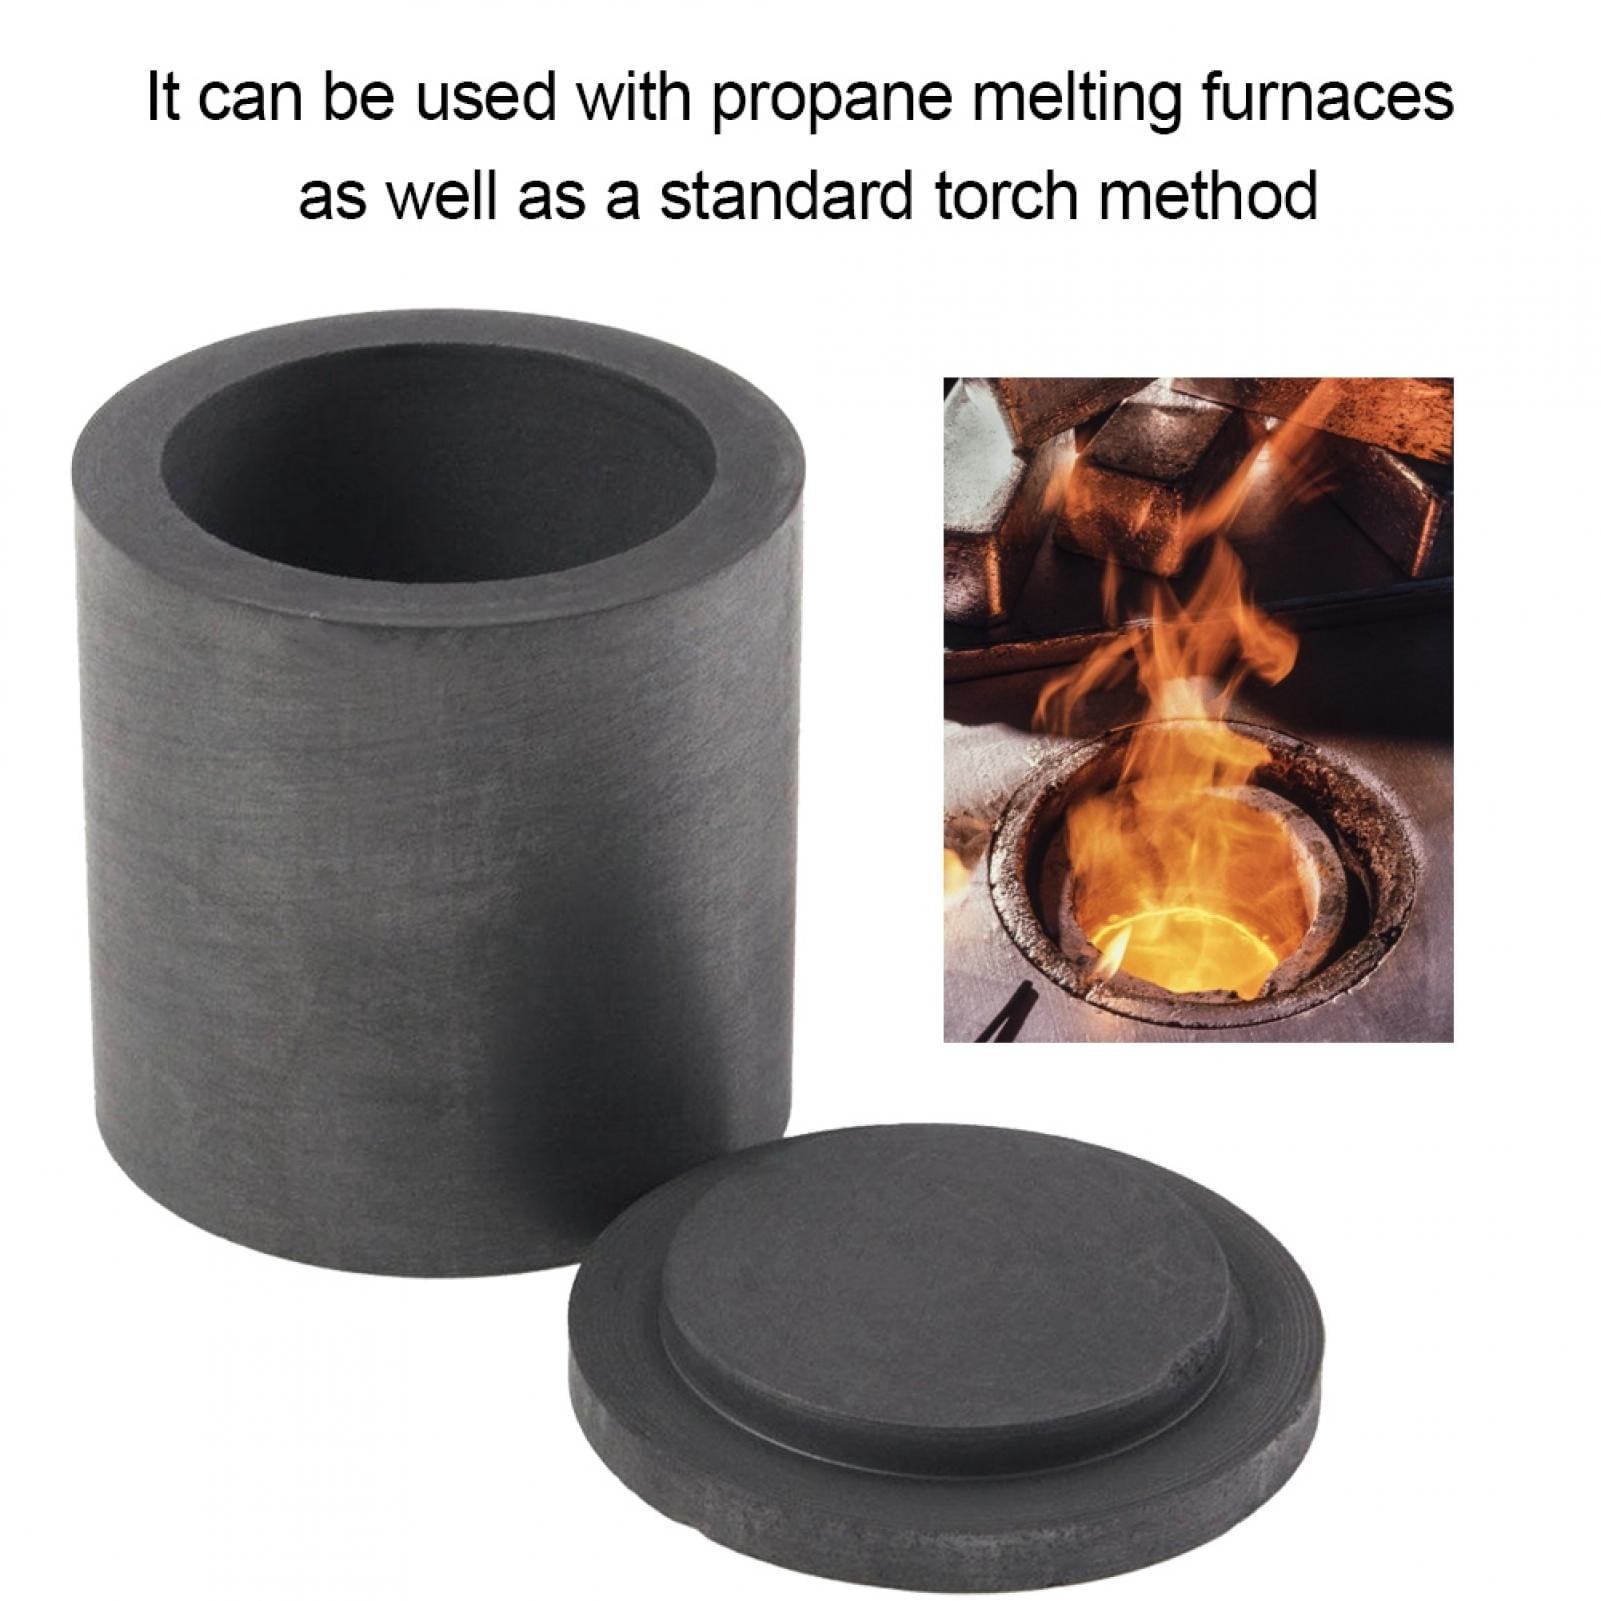 Crucible Casting Melting Crucible for Metals For Copper Brass Gold Silver 4040Mm Crucible Furnace High Purity Gold Melting Kit Graphite Crucible 